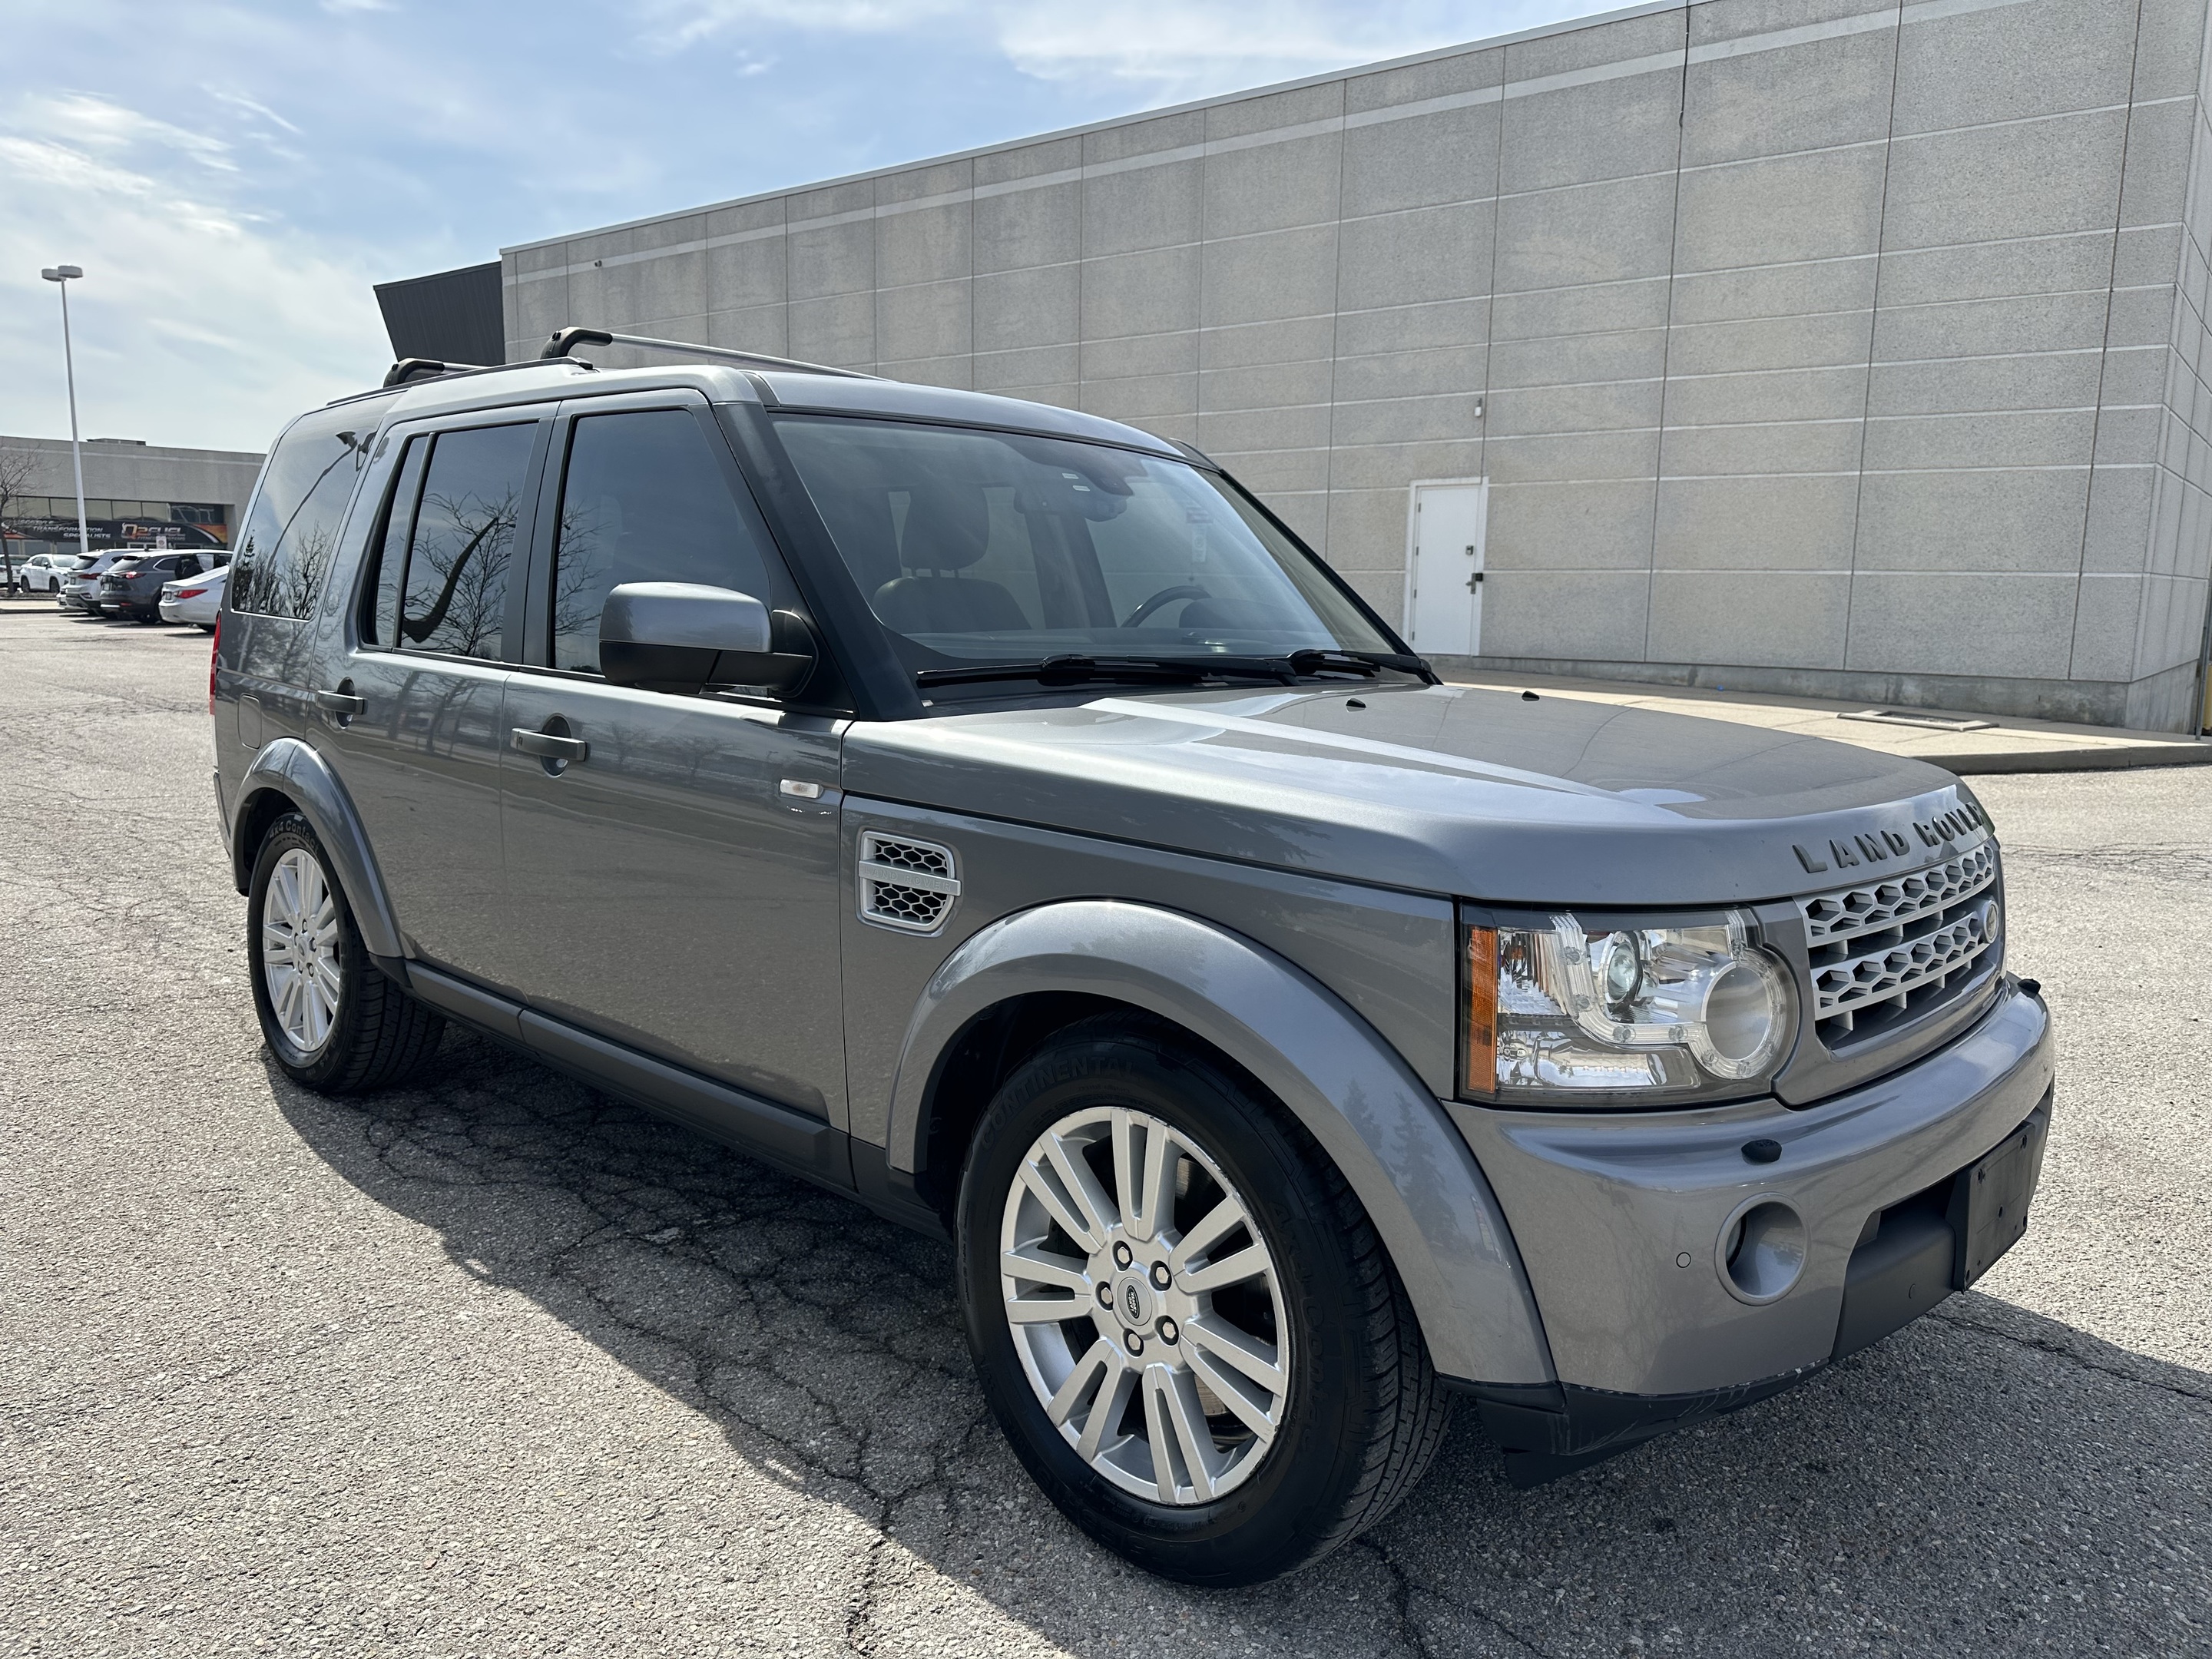 2011 Land Rover LR4 | 4WD | V8 | Limited Edition | 7 Passengers |